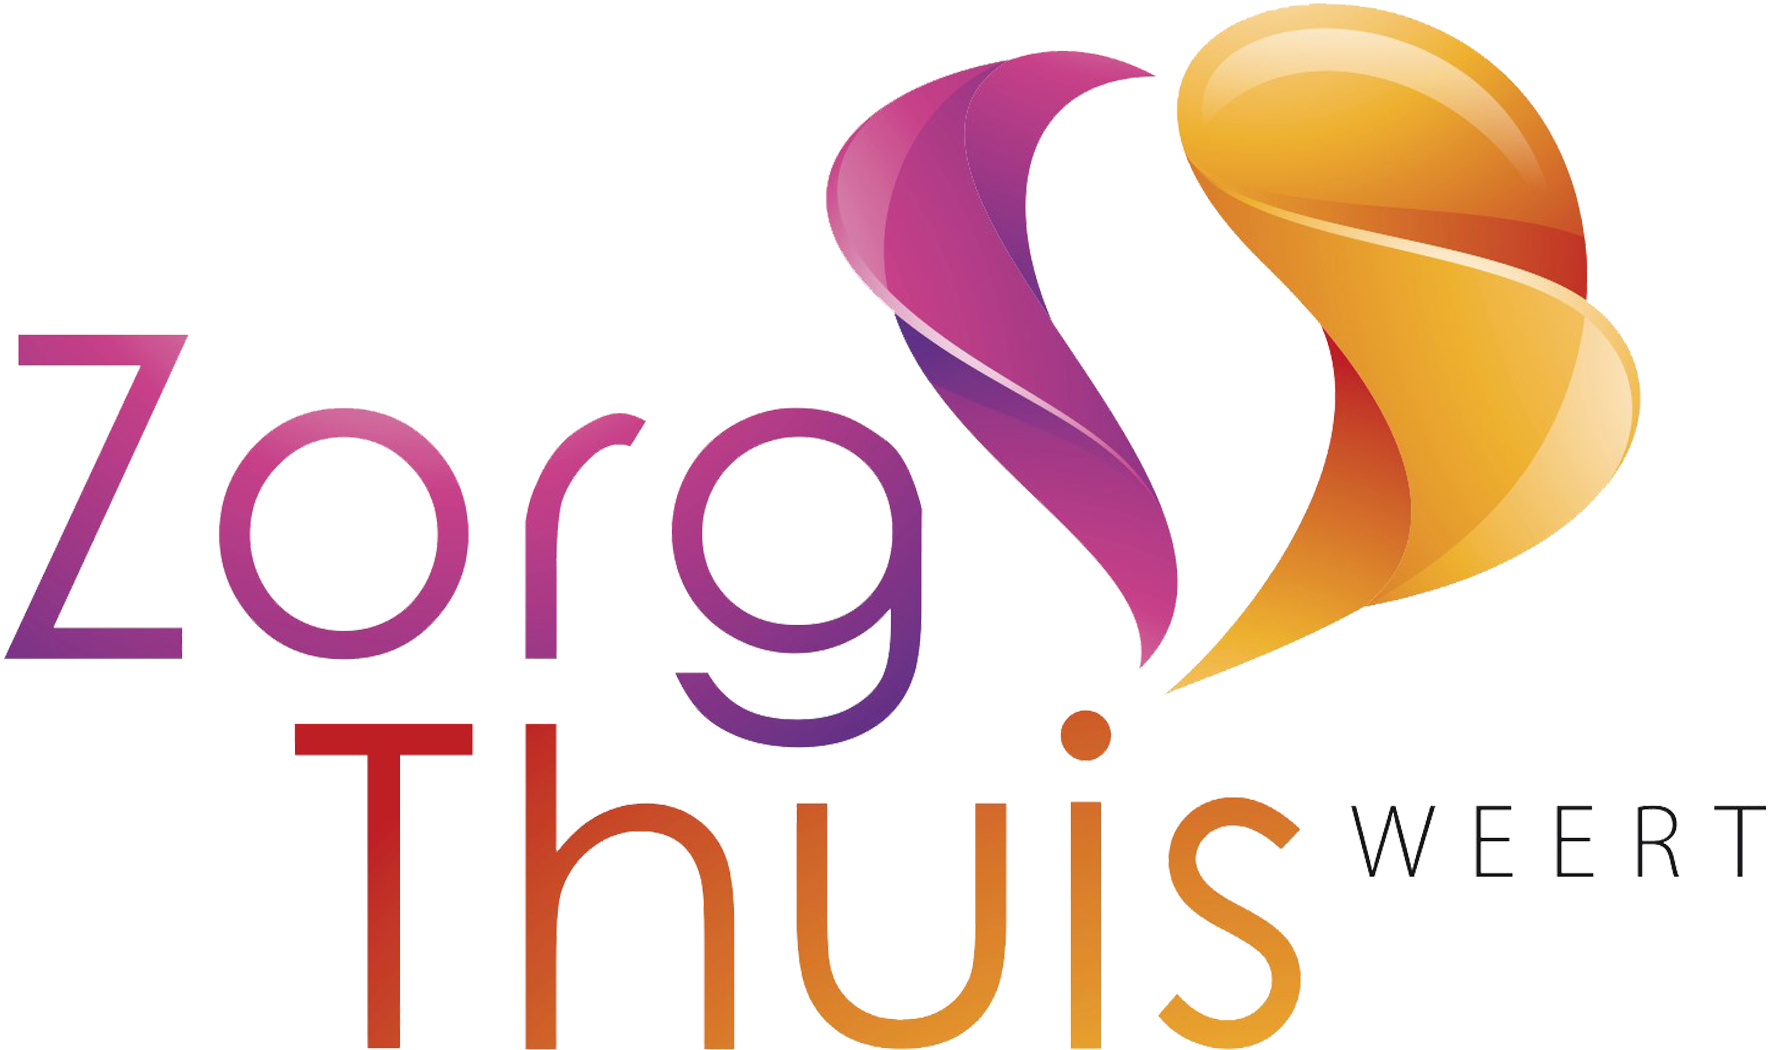 logo zorgthuisweert png